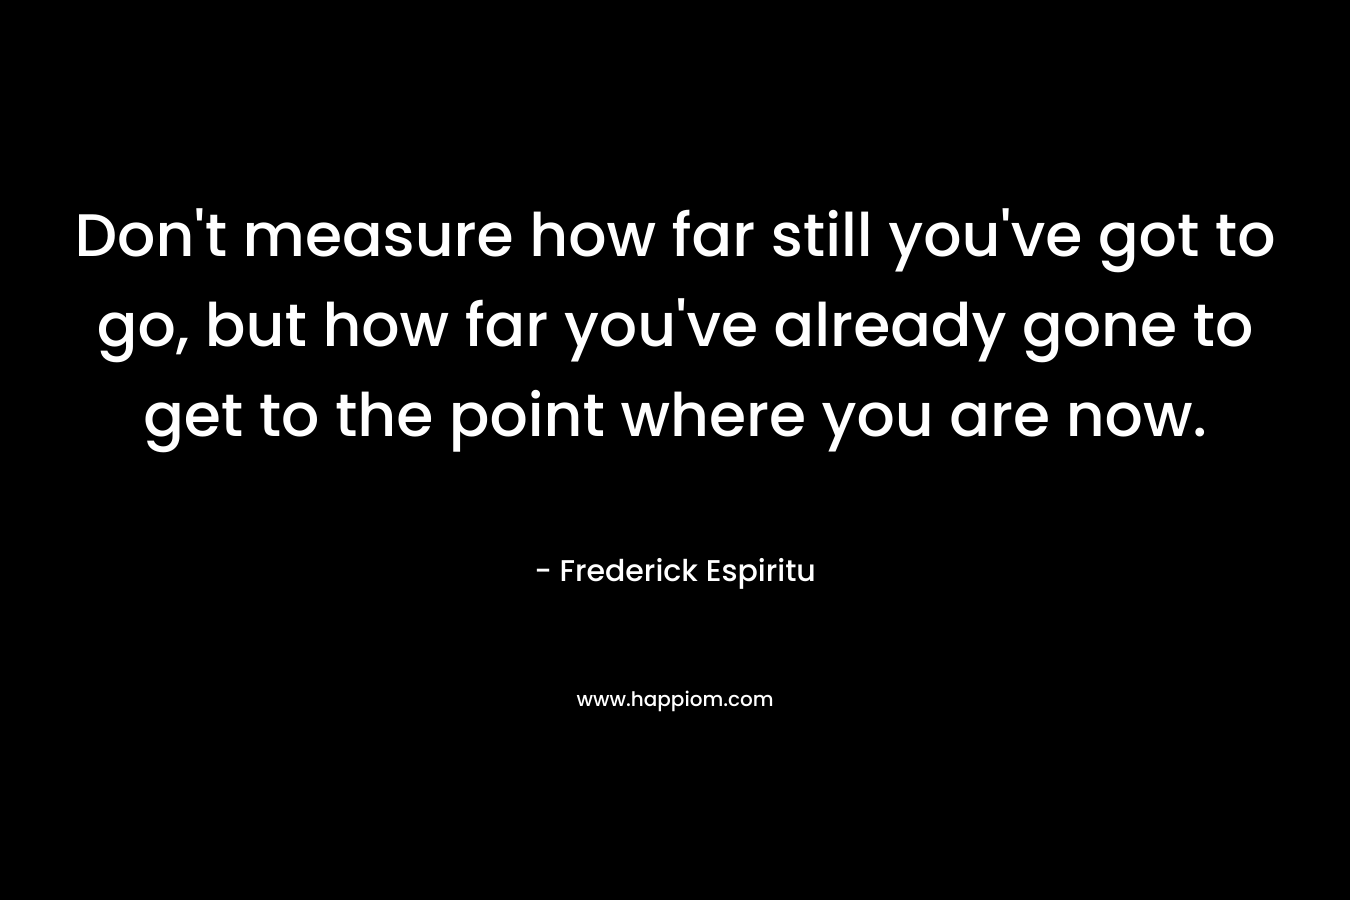 Don’t measure how far still you’ve got to go, but how far you’ve already gone to get to the point where you are now. – Frederick Espiritu